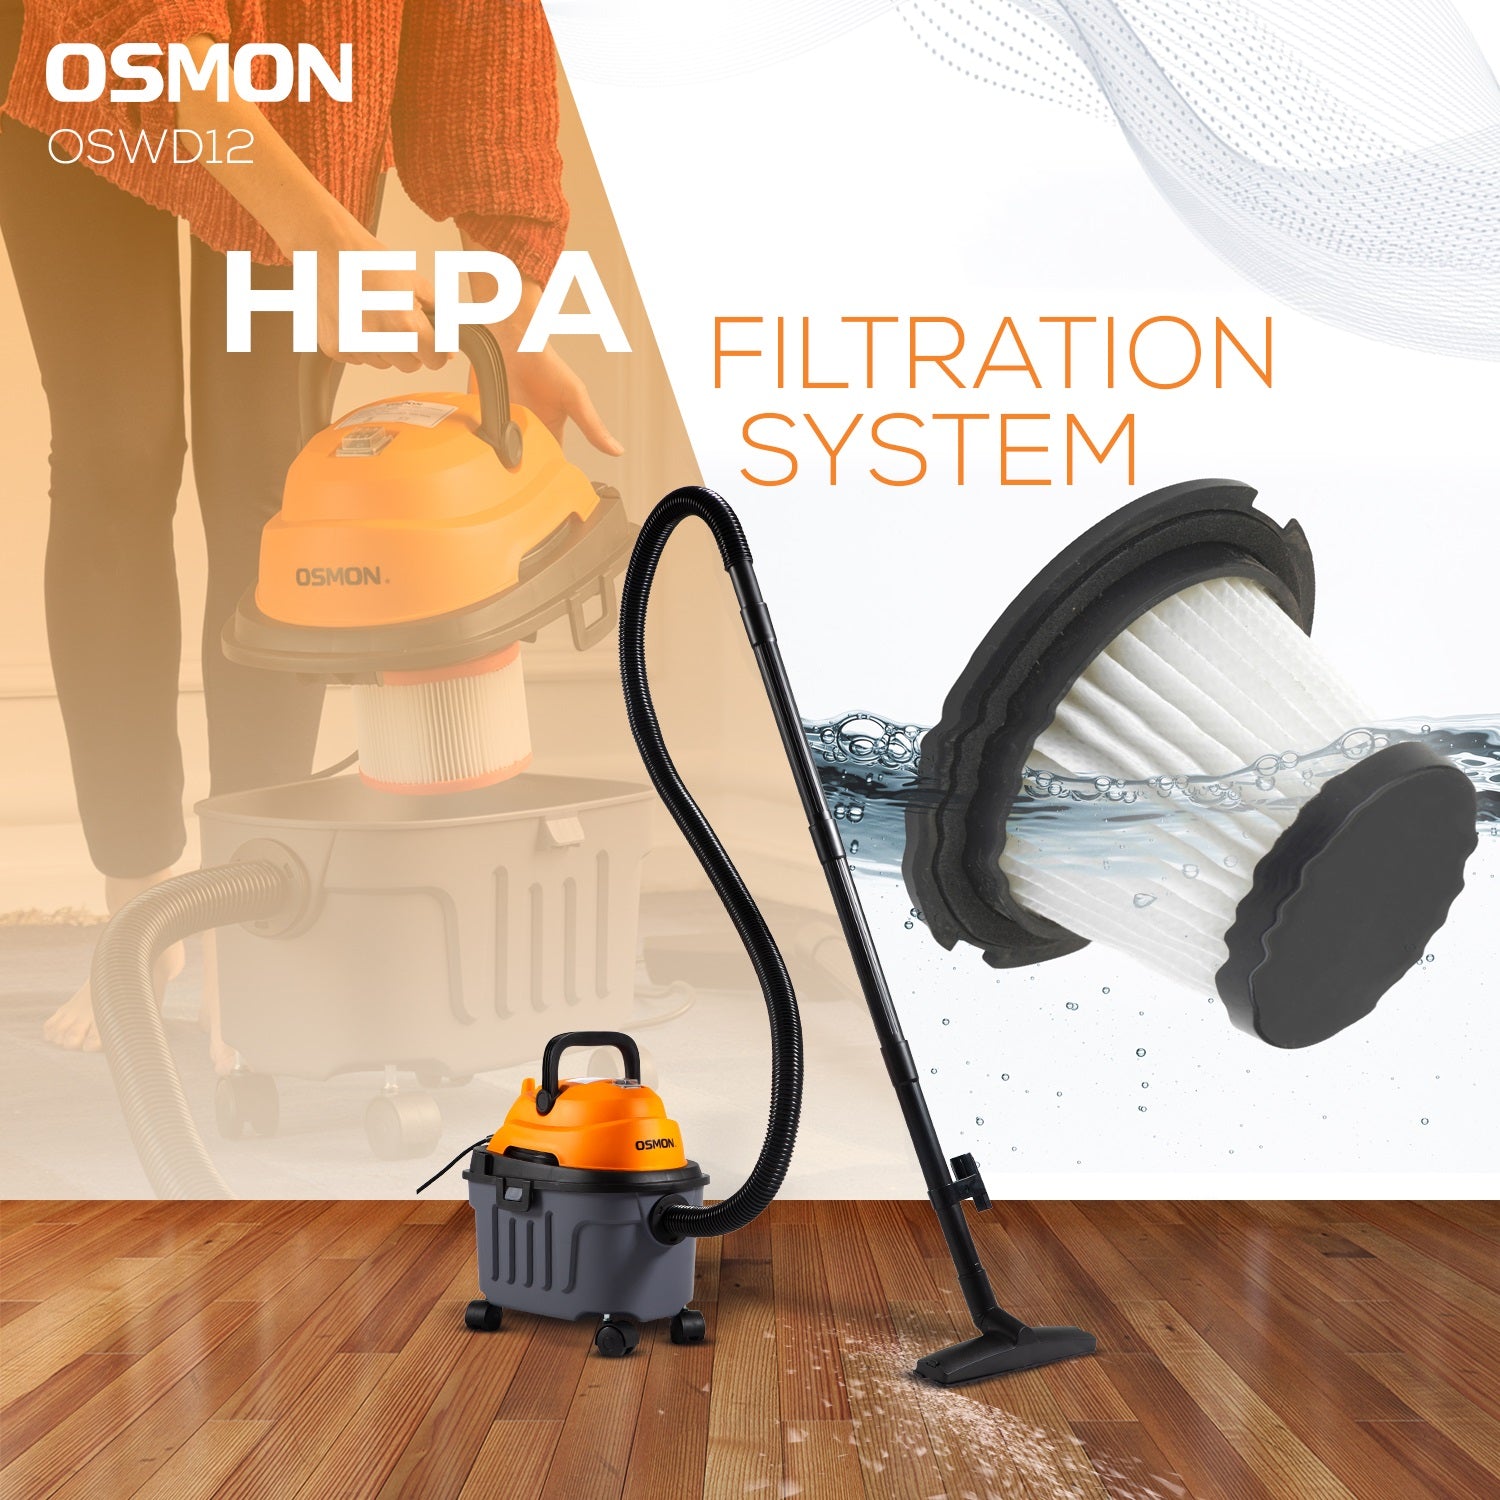 Featuring the new and unique HEPA filtration system of Osmon WD12